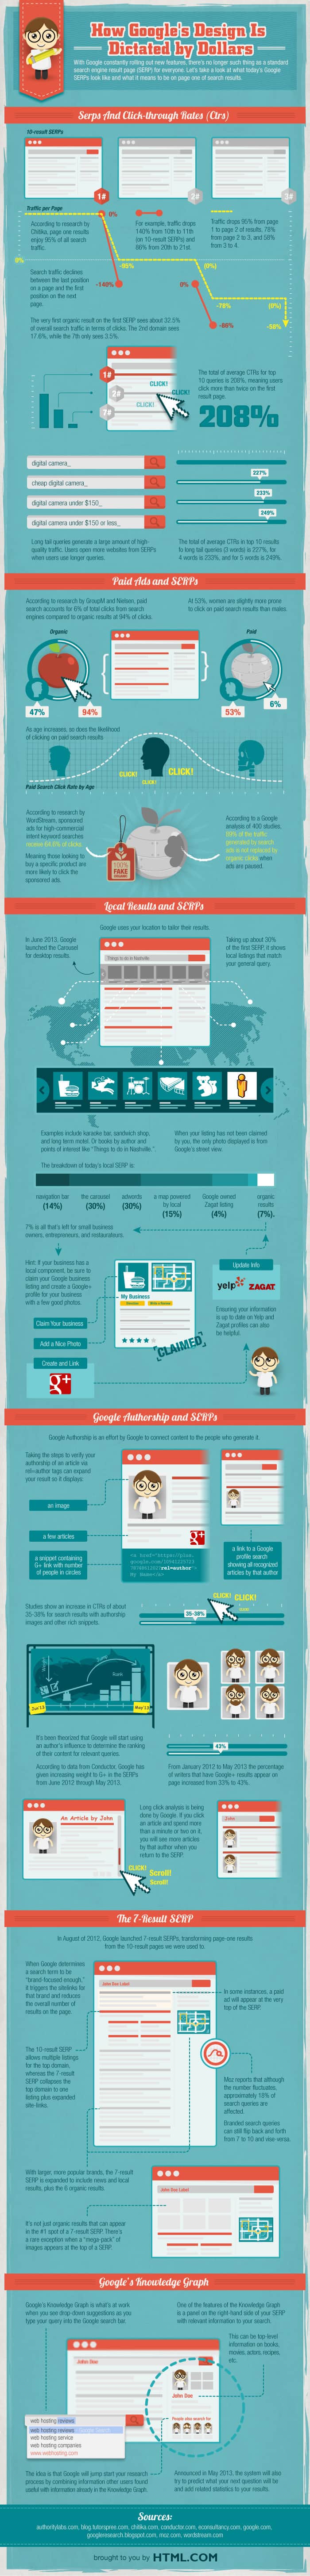 How Google's Design is Dictate by Dollars Infographic